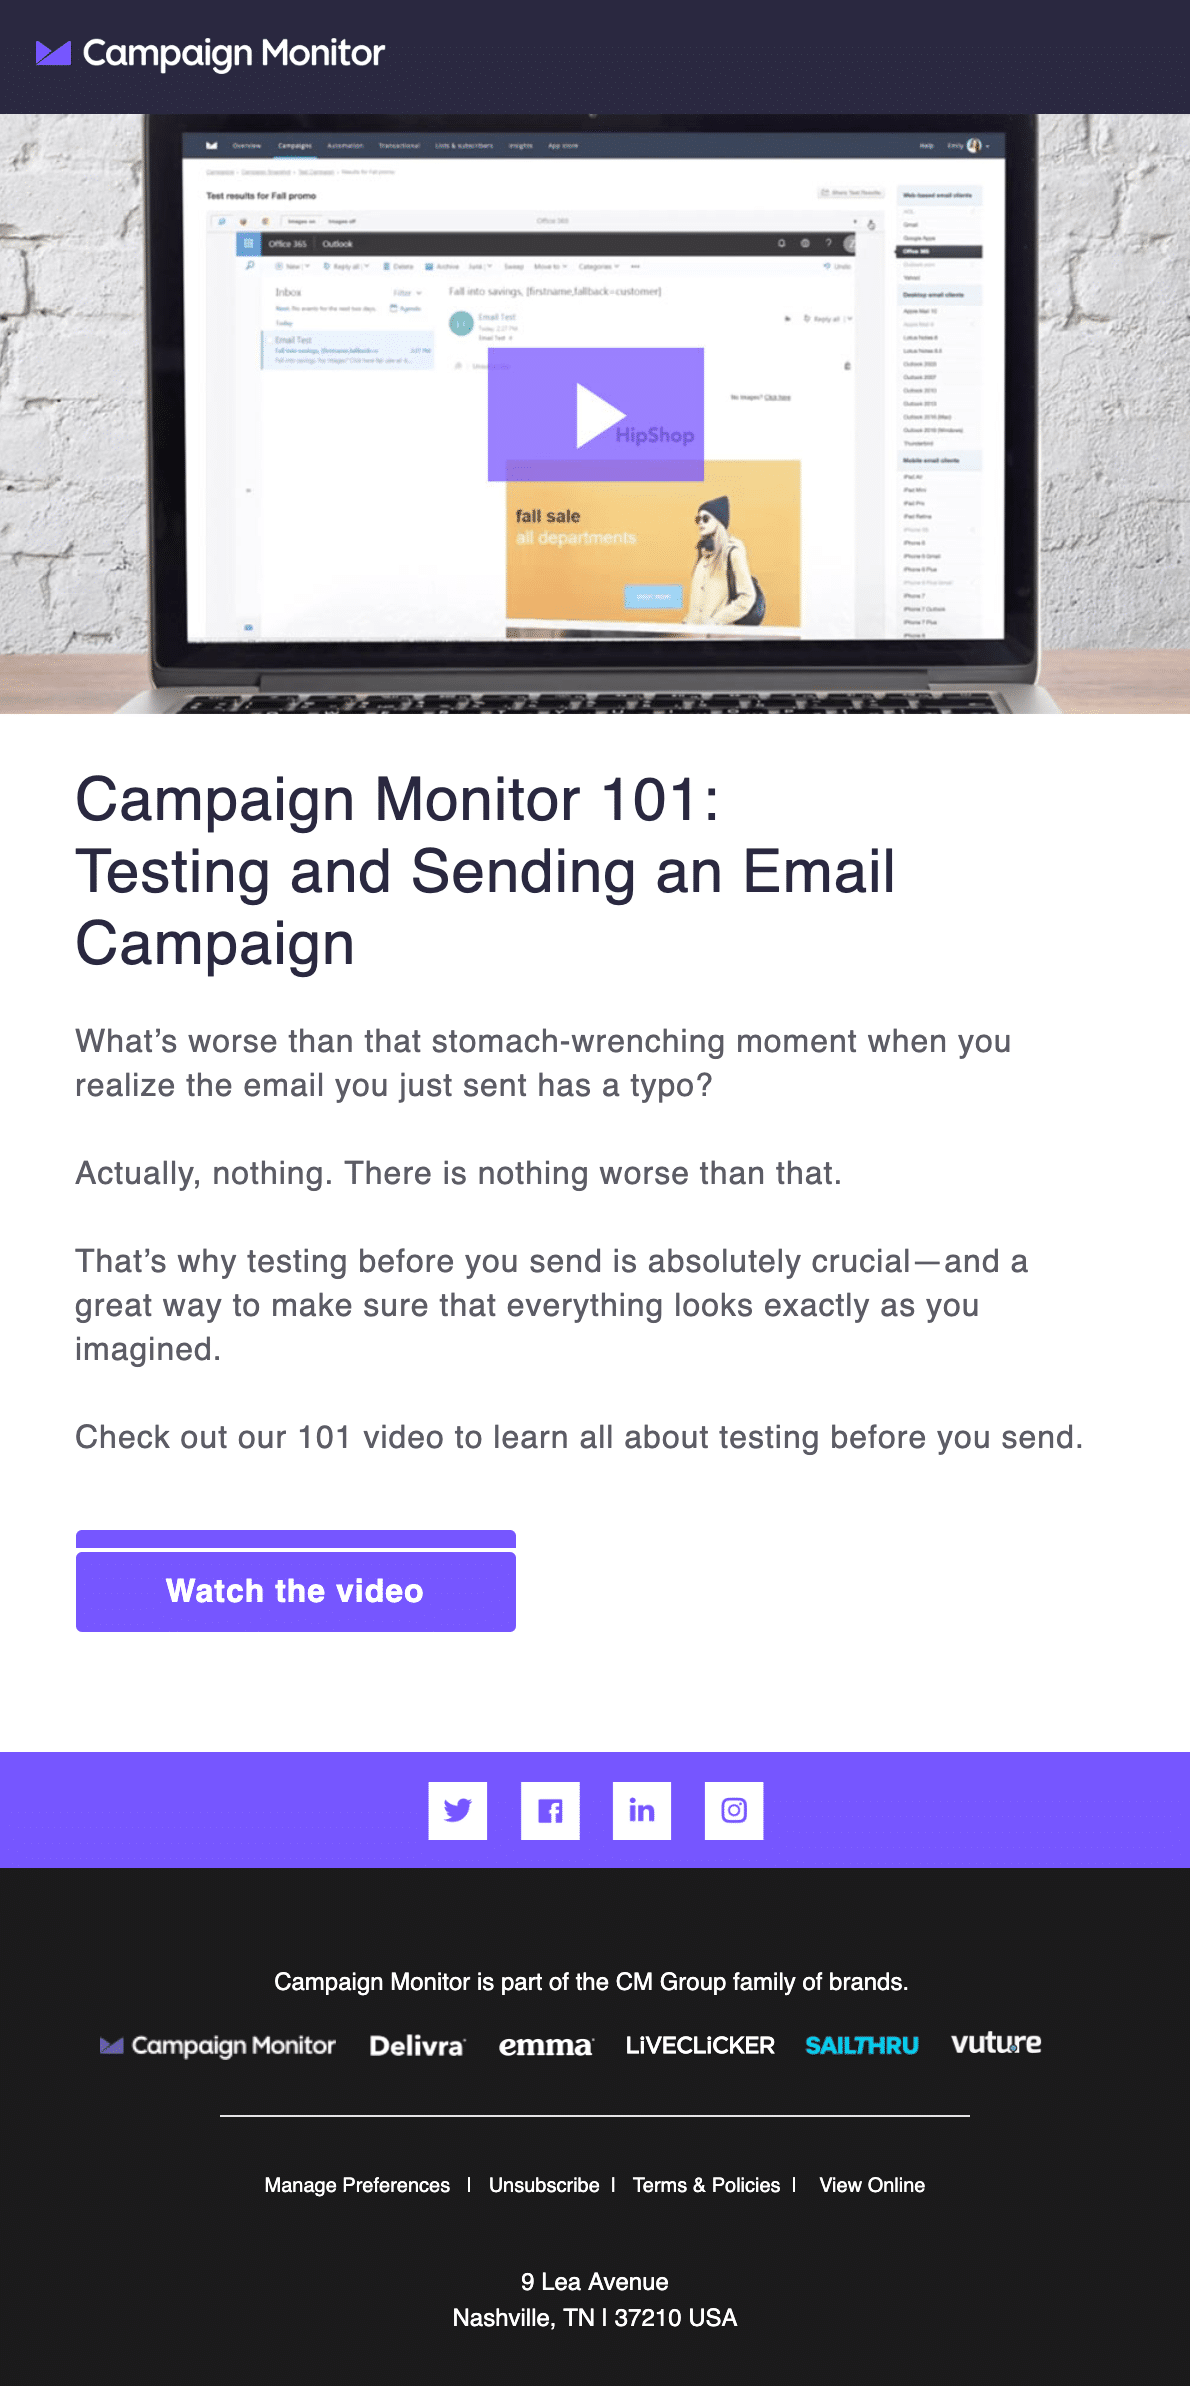 This email from Campaign Monitor uses a linkable thumbnail to make it simple for our subscribers to watch the video. 